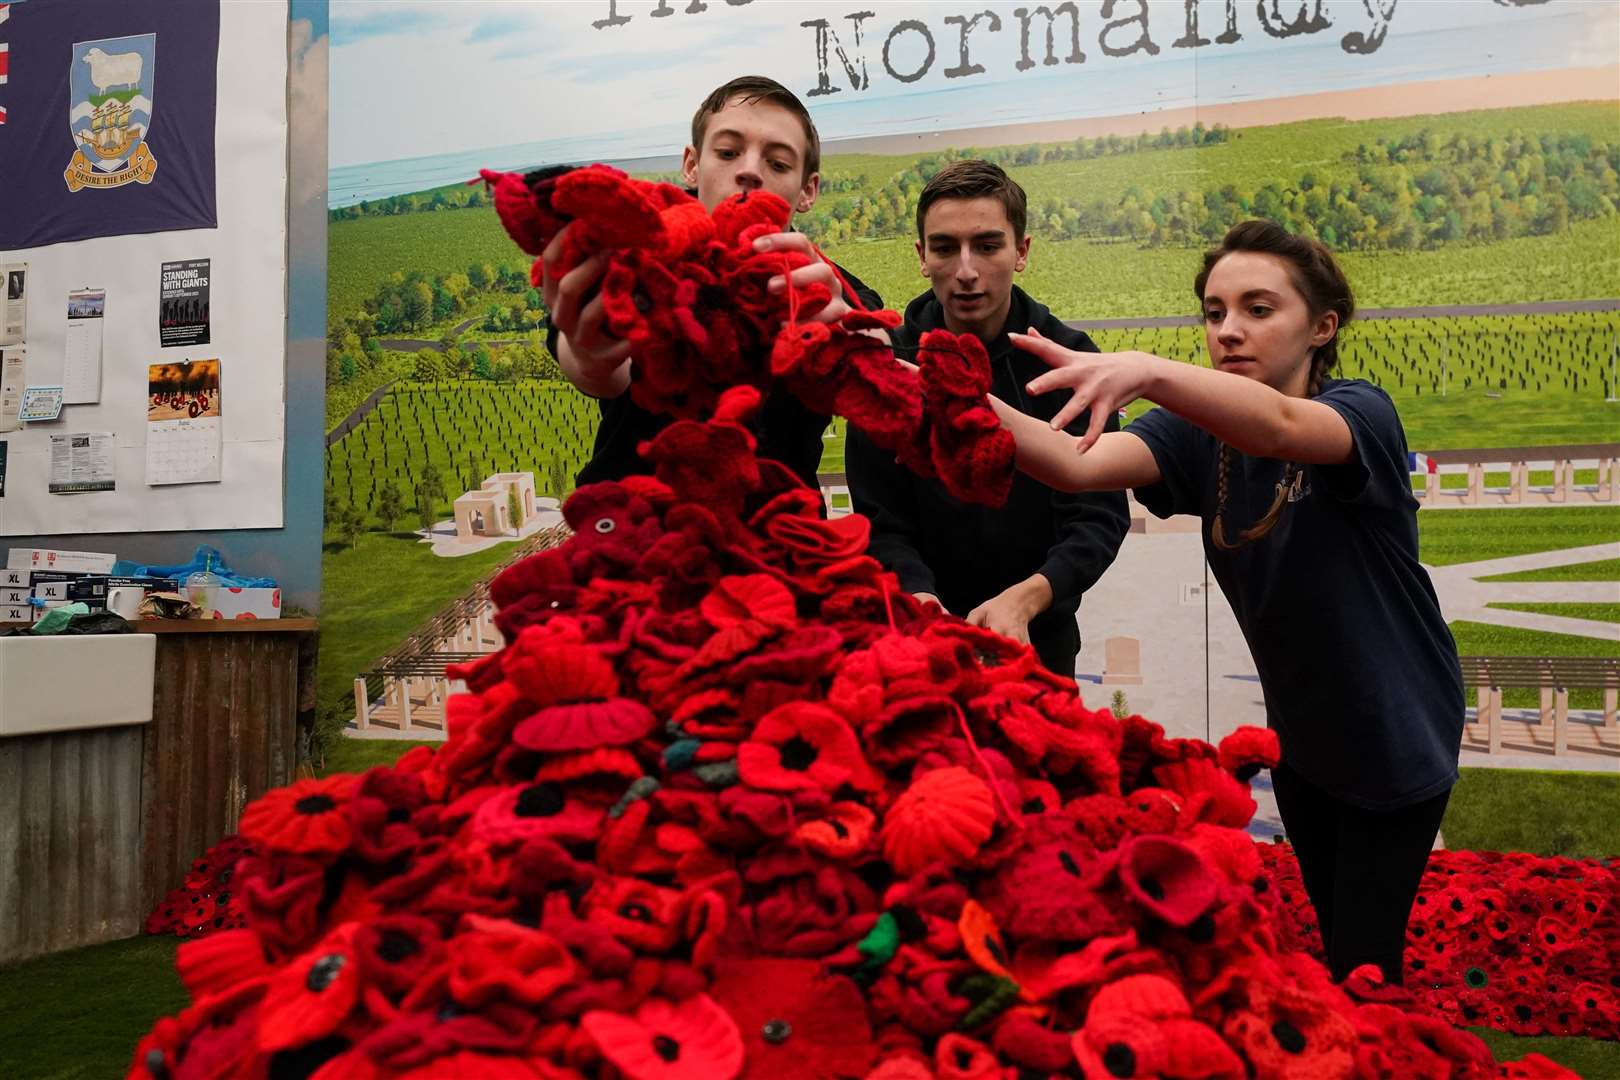 Women’s Institute members across the country crocheted 22,000 poppies will be displayed around the base of the crates (Jacob King/PA)